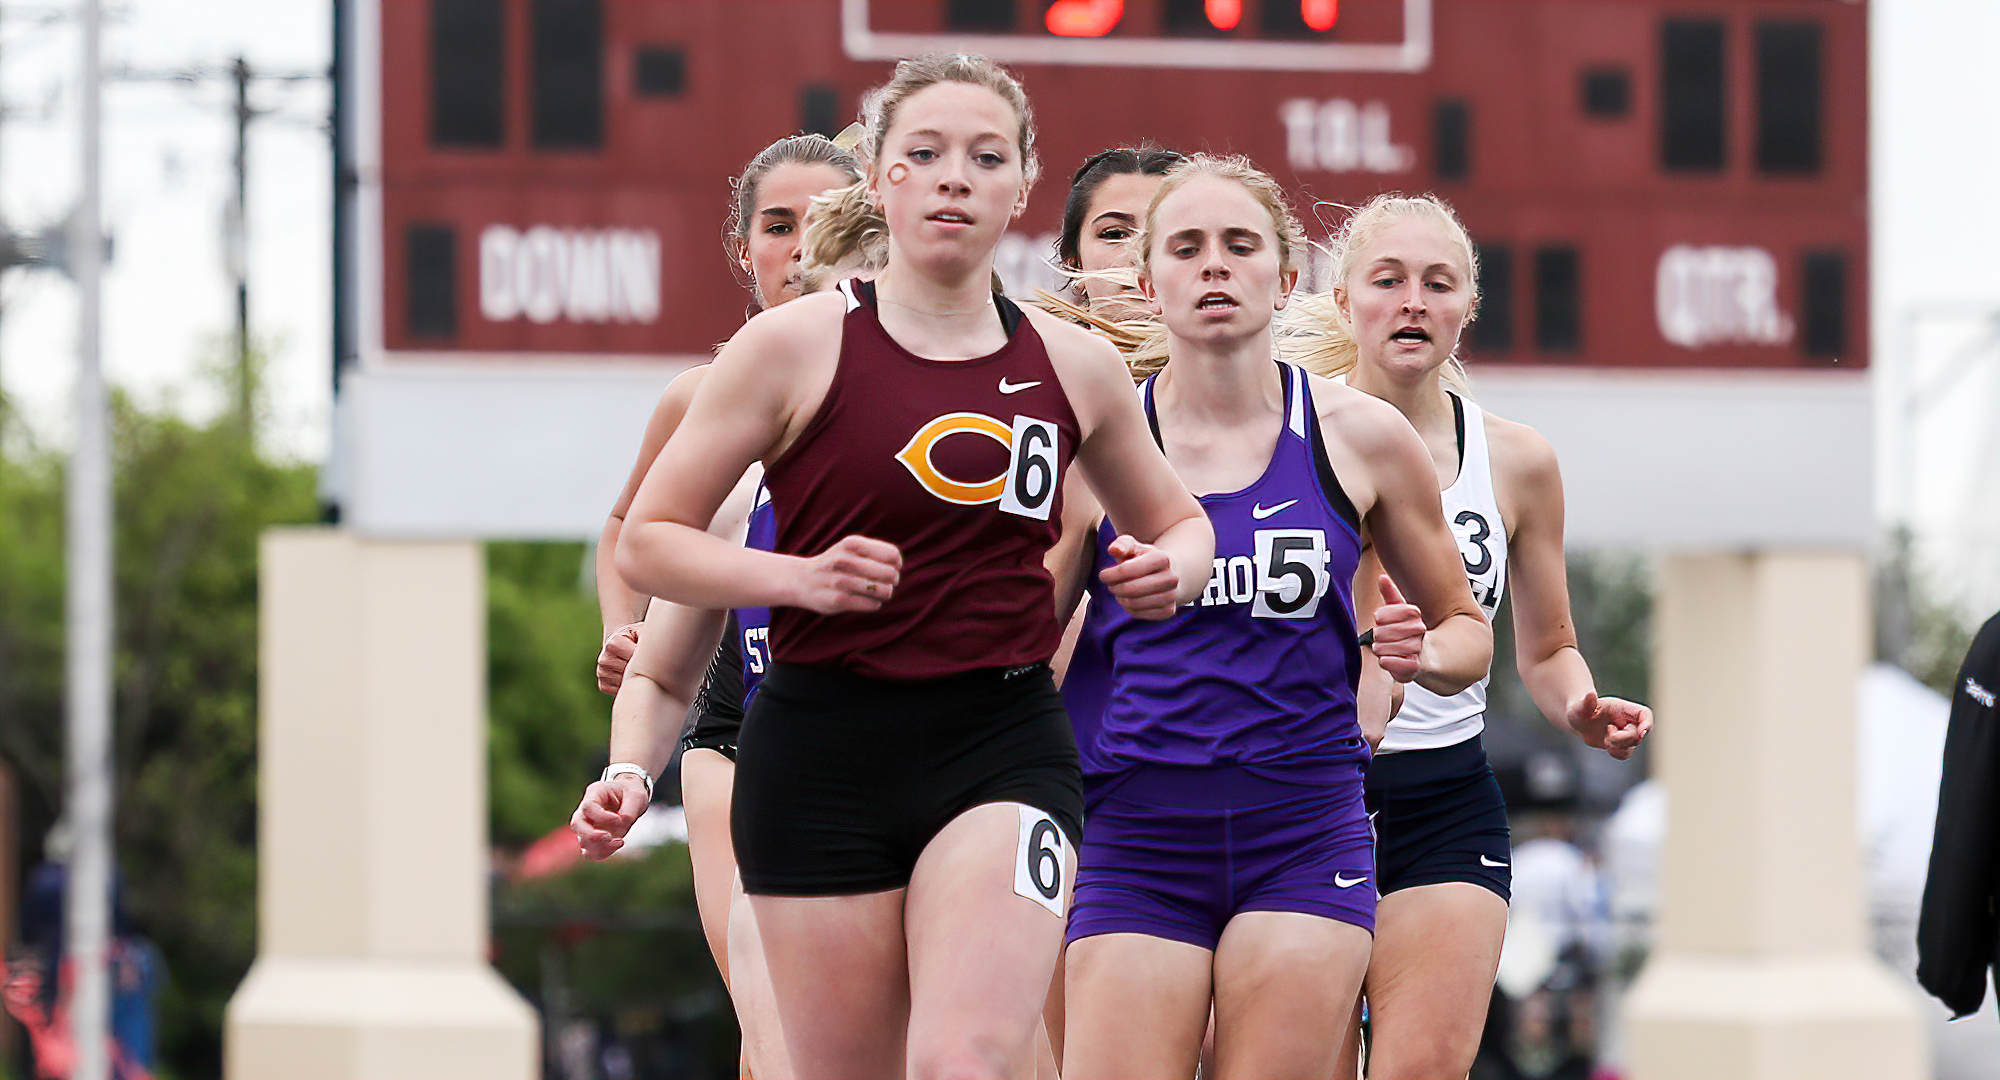 Concordia senior Josie Herrmann is set to compete at the NCAA Division I outdoor track and field championships in the women's 800 and 1,500 meters. (Photo courtesy of Nathan Lodermeier)